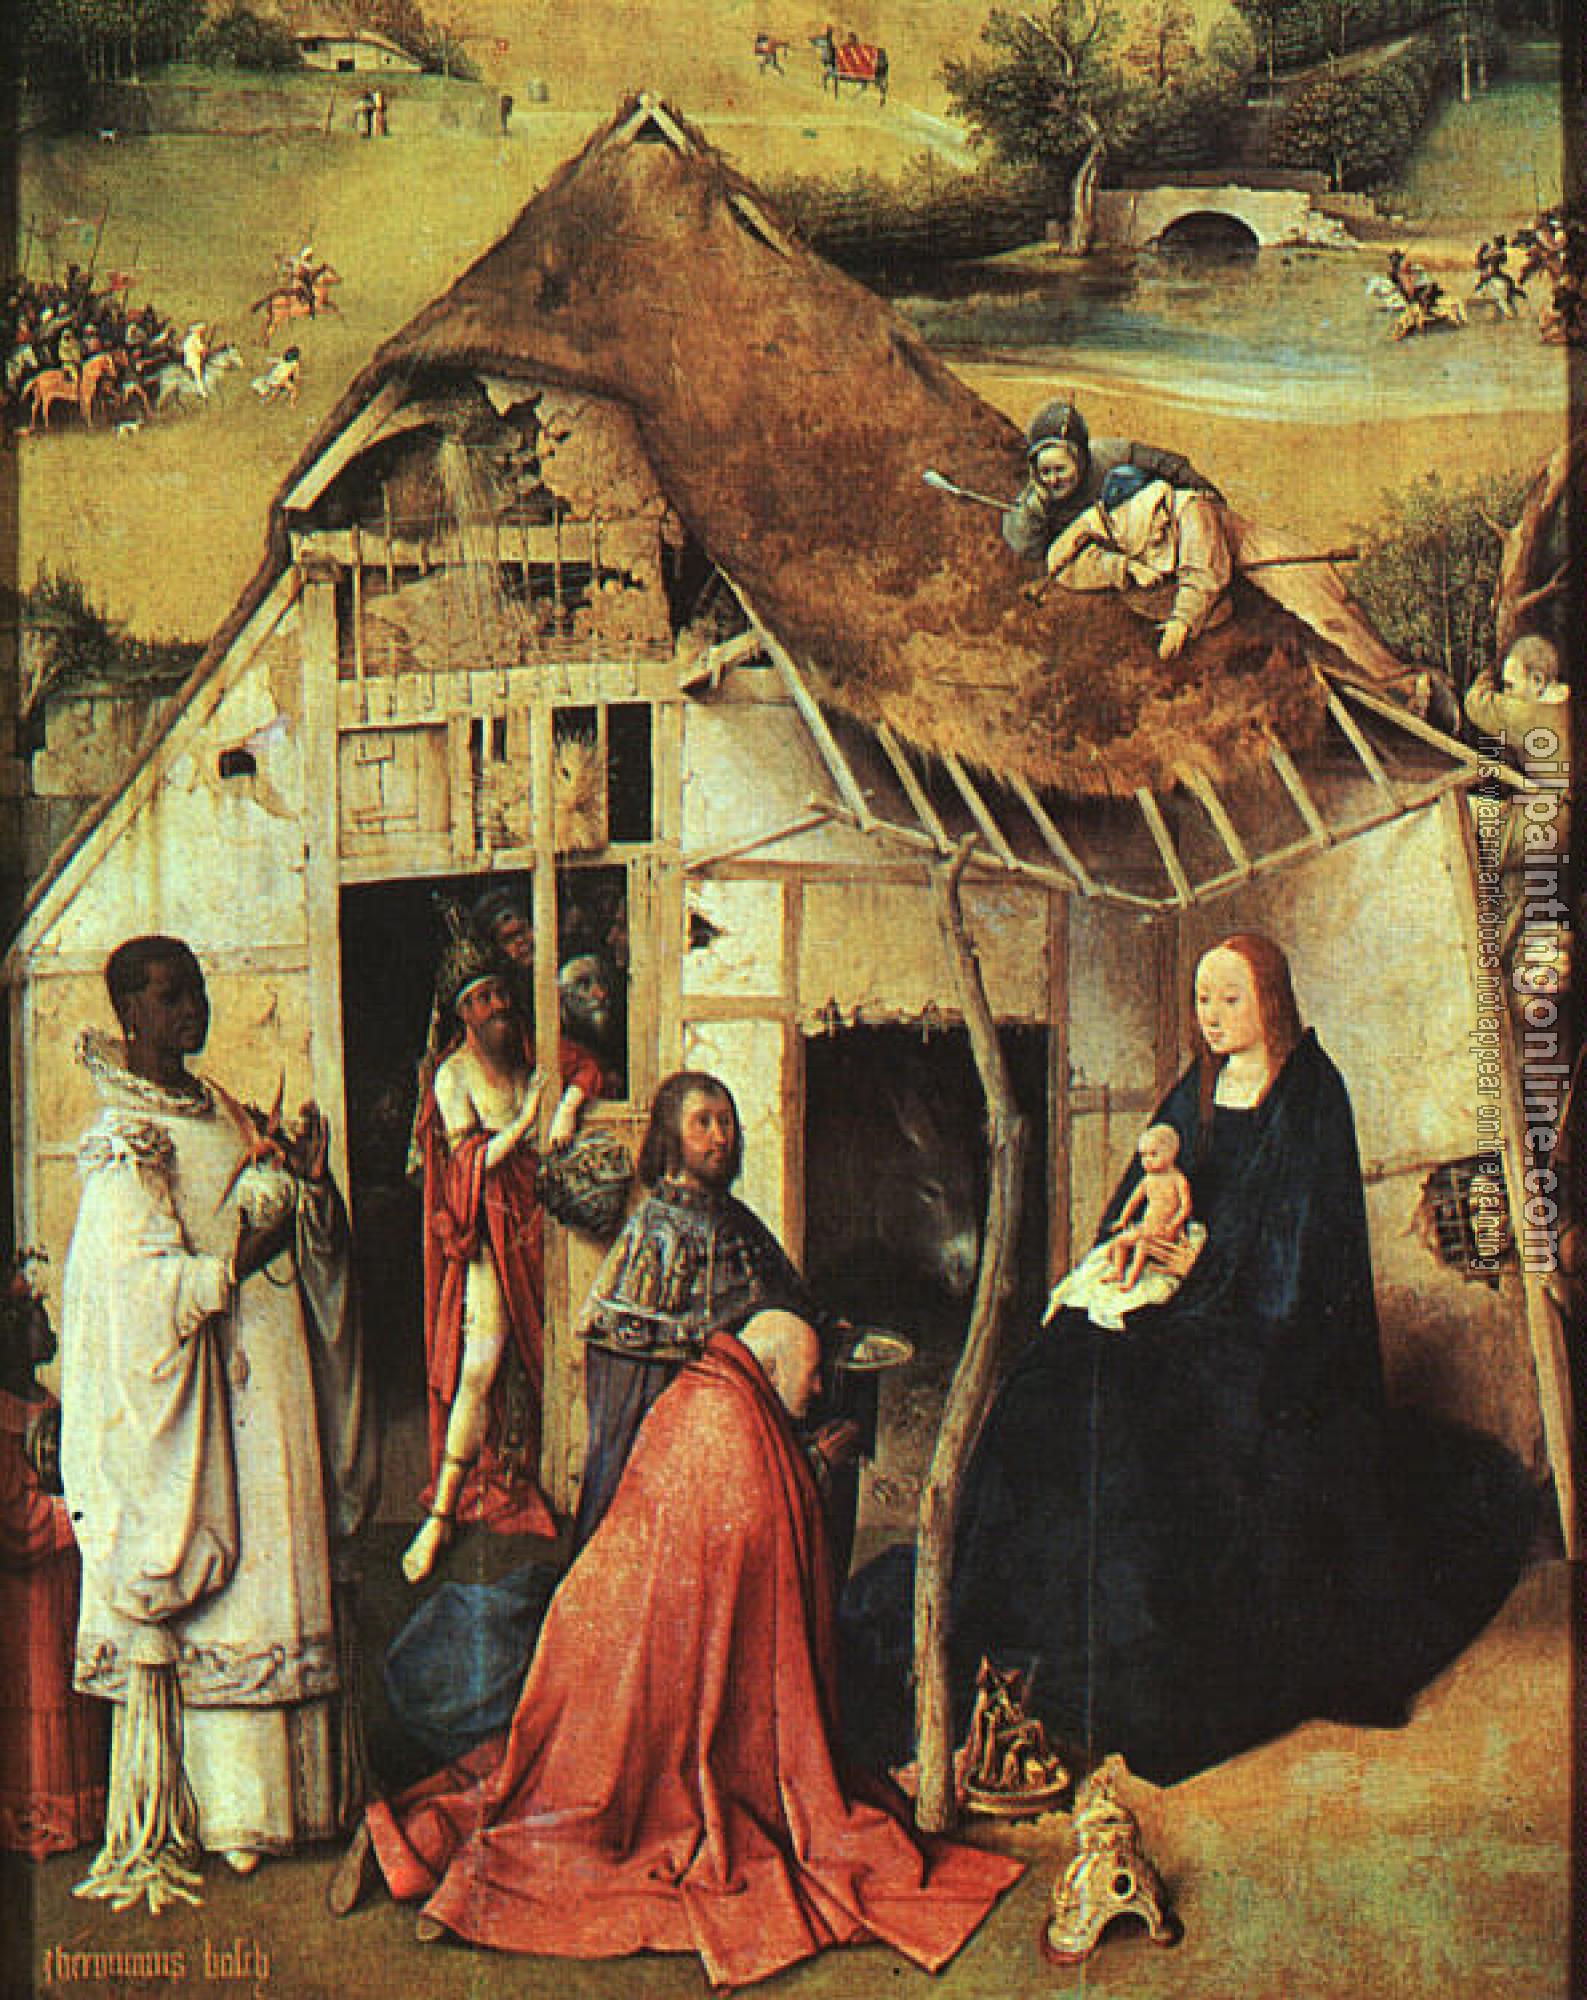 Bosch, Hieronymus - The Adoration of the Magi, central panel of the Epiphany triptych, detail